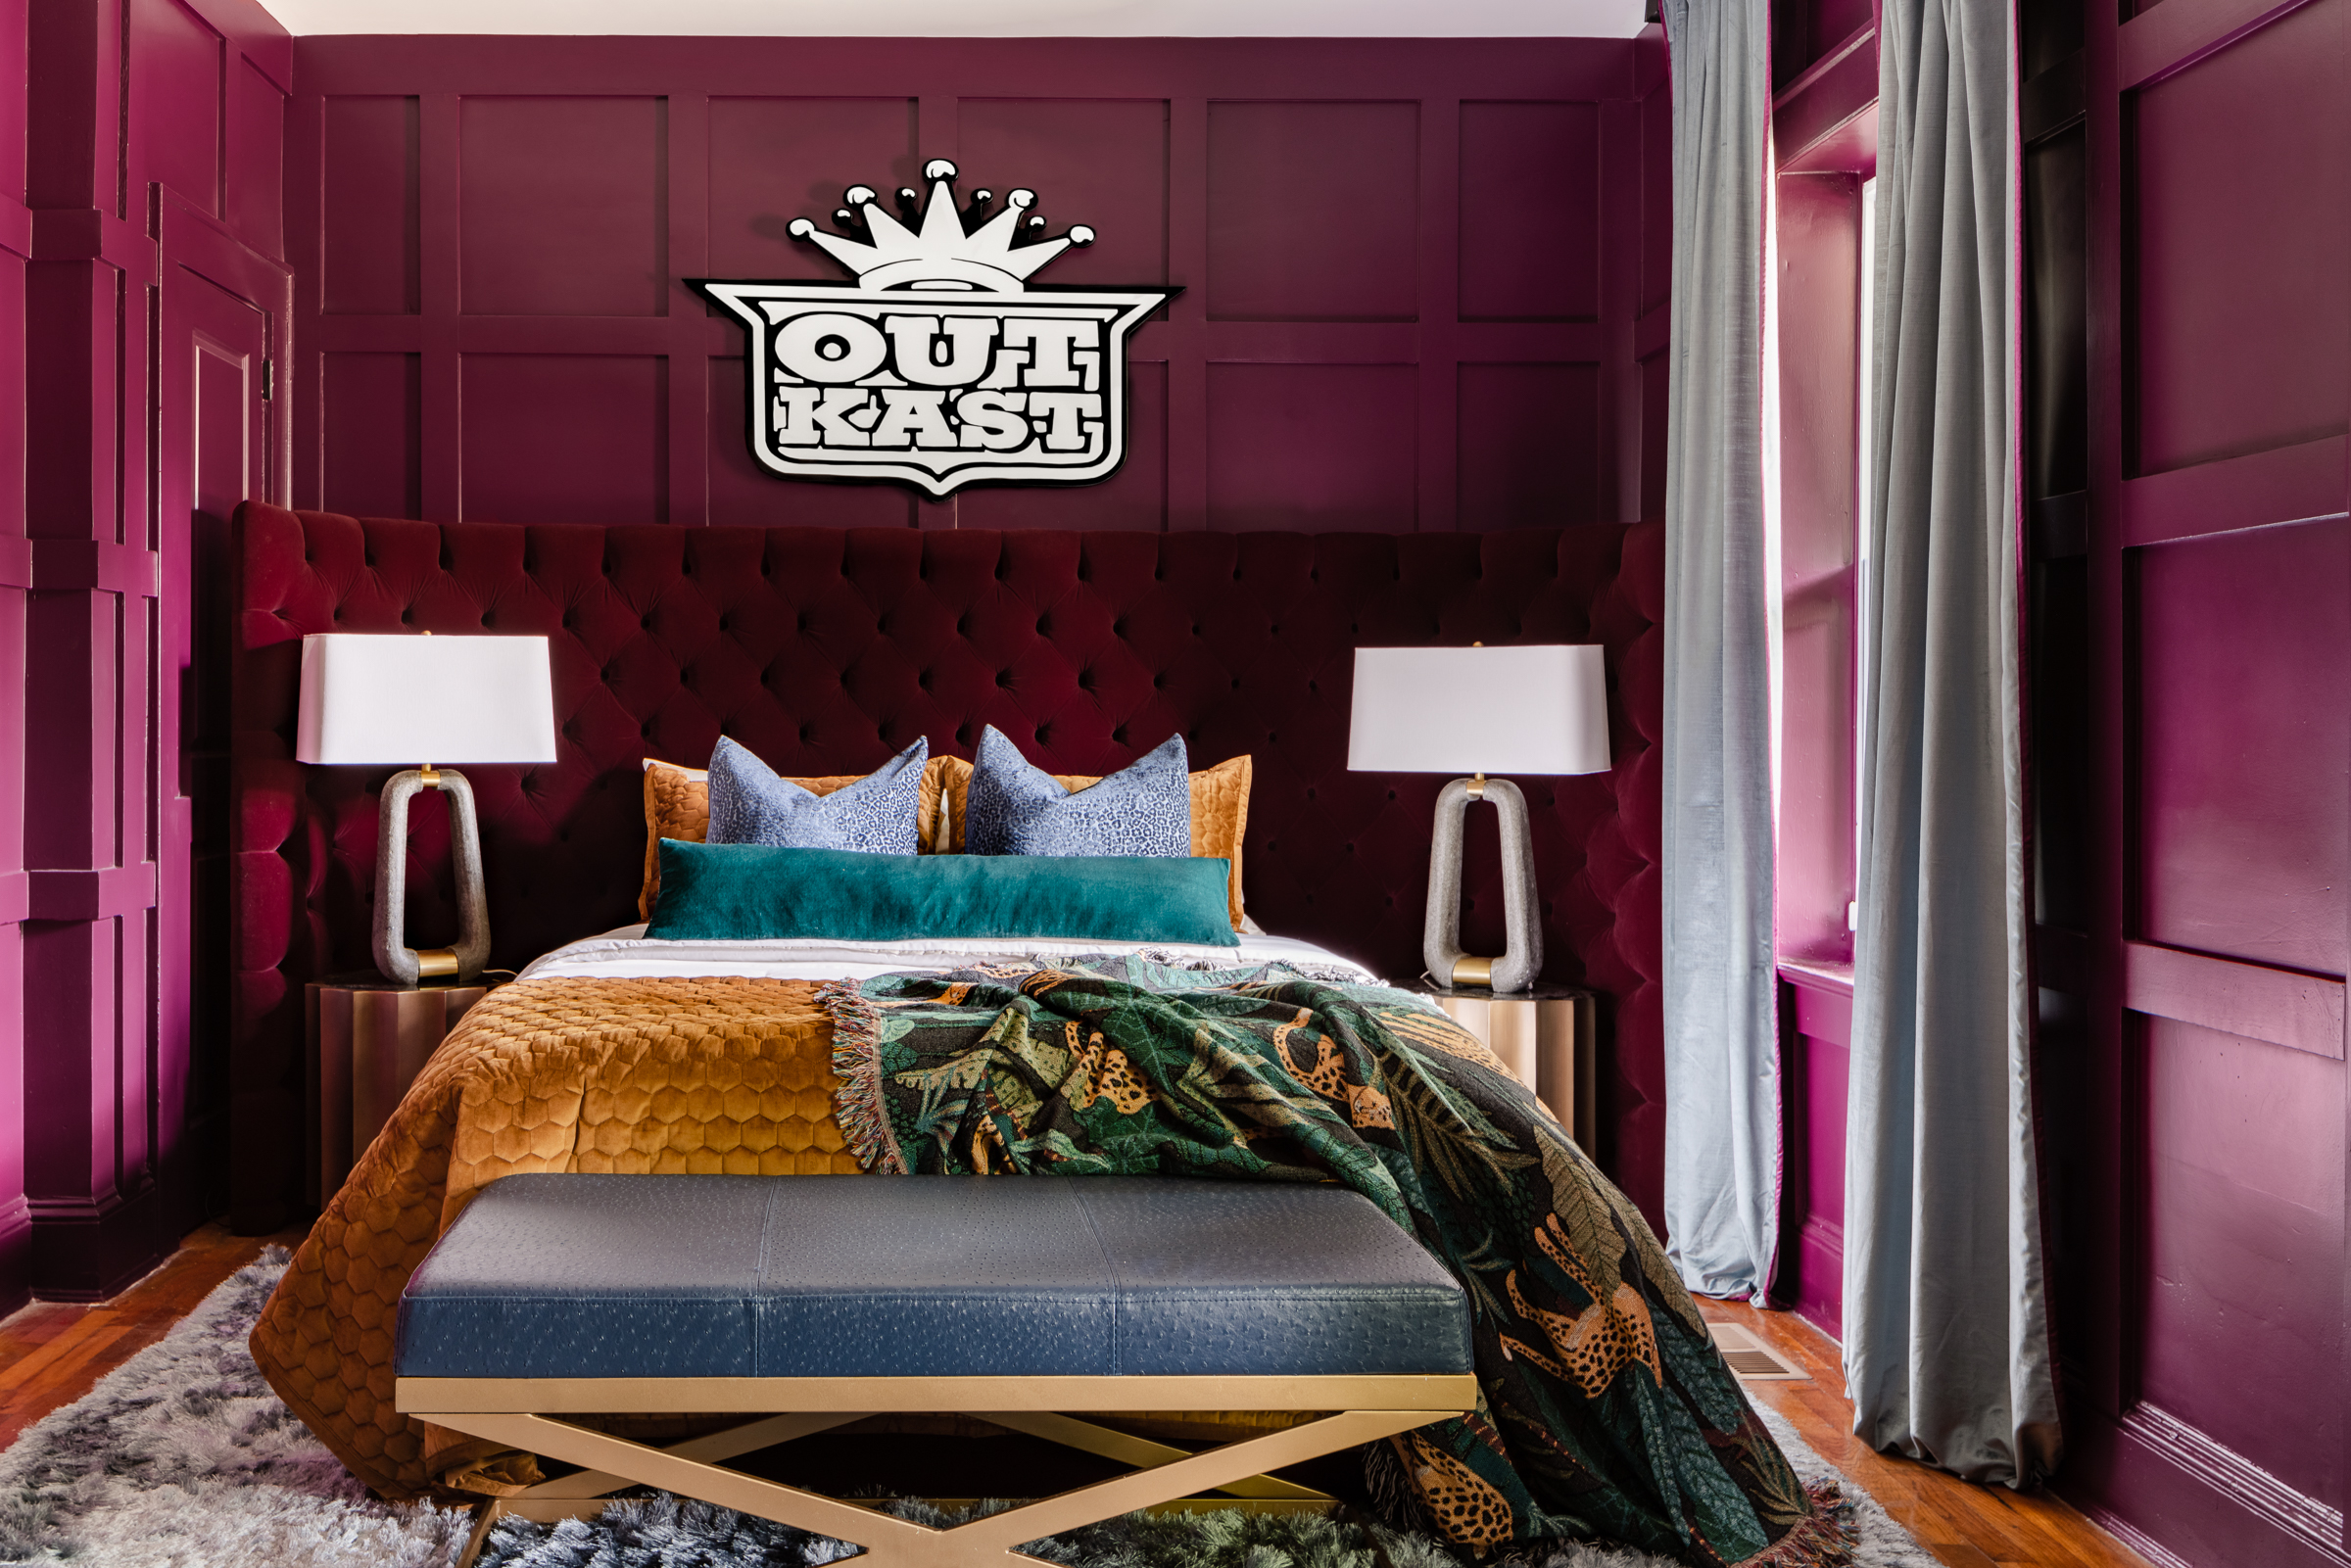 The Dungeon House bedroom with purple walls and Outkast plaque above colorful bed